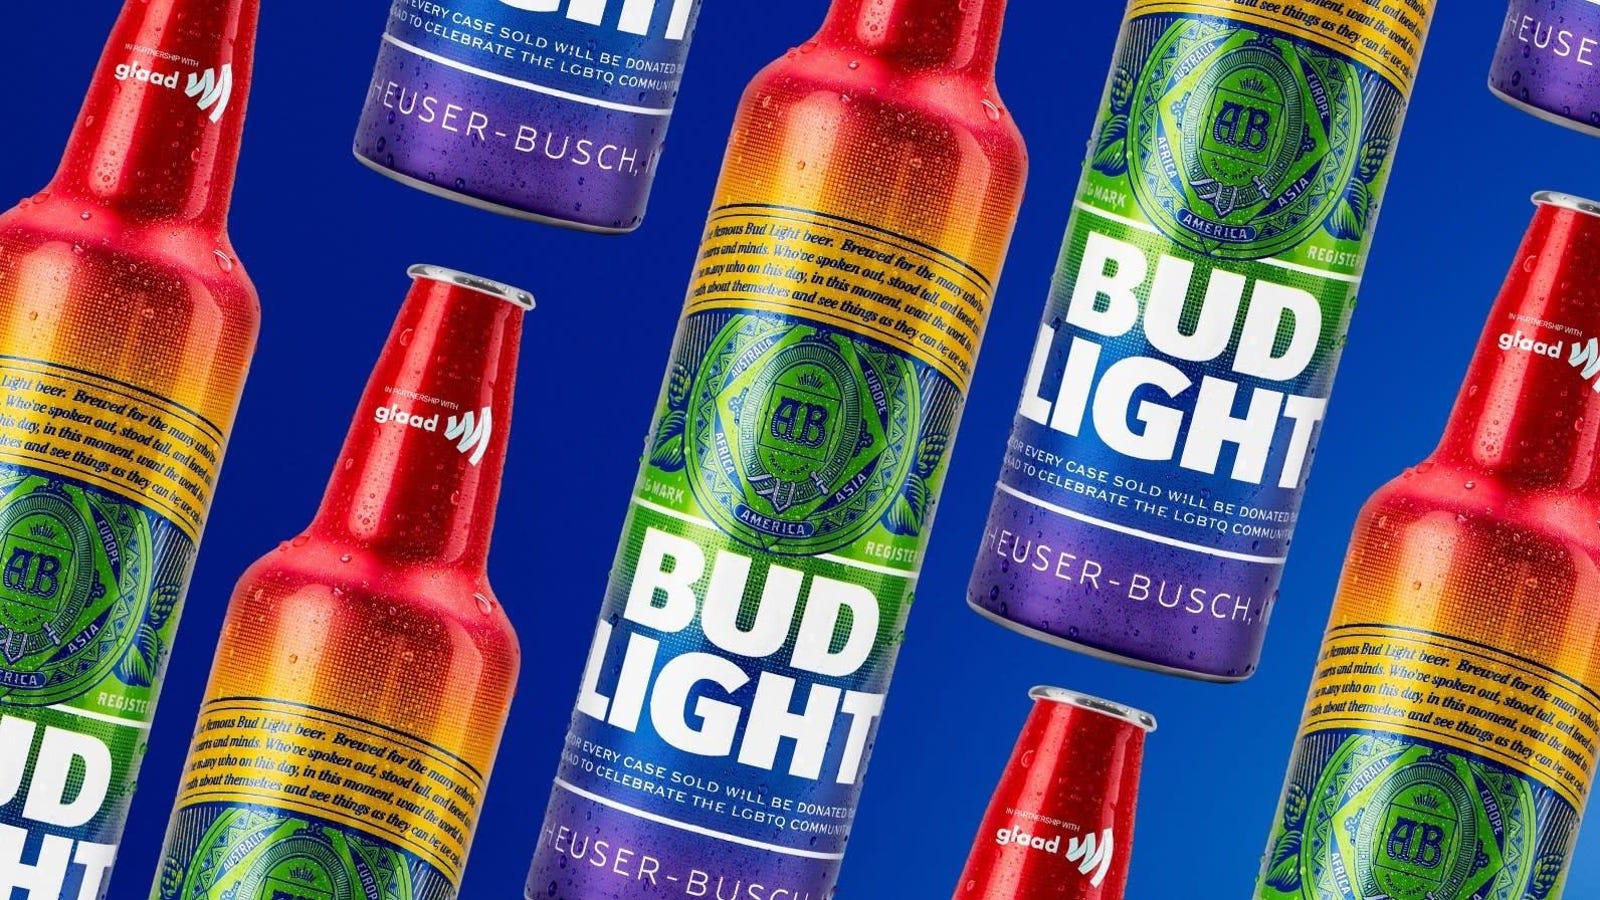 Budweiser U.K.’s Pride campaign raises flags, and not just rainbow ones